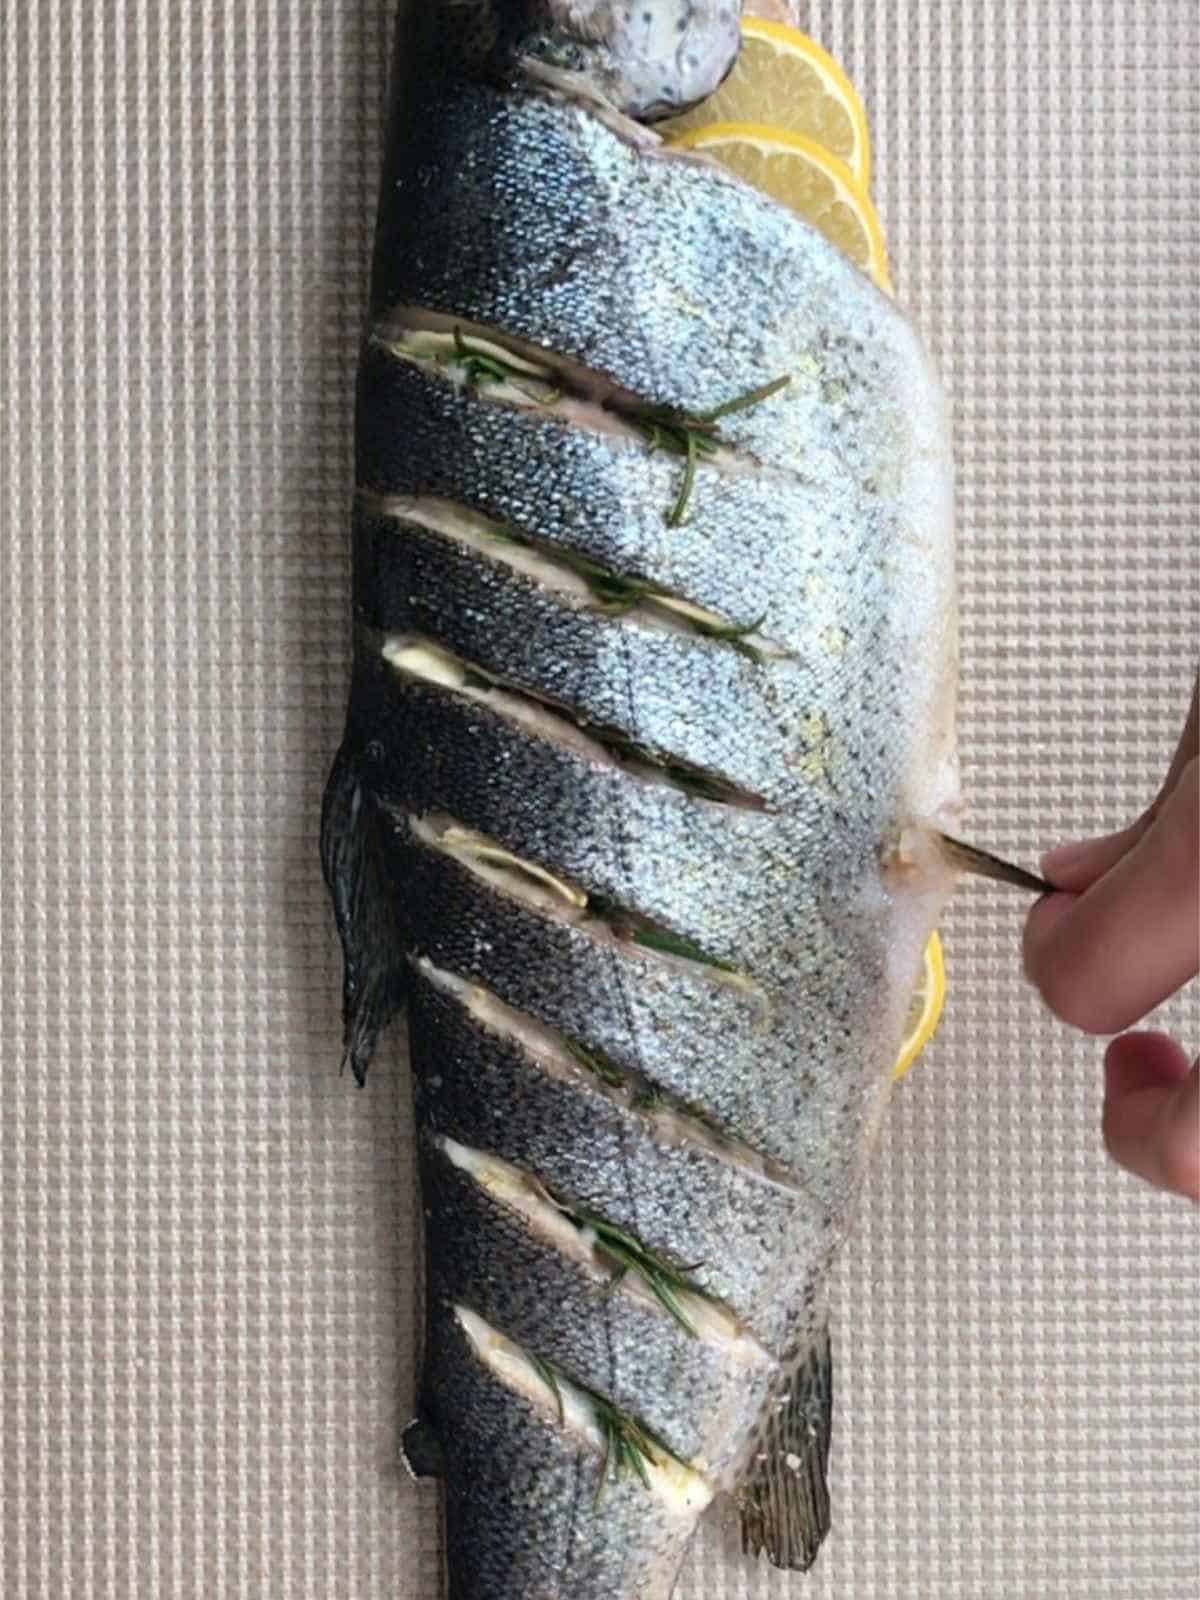 Hand tugging at a fin on a cooked trout.